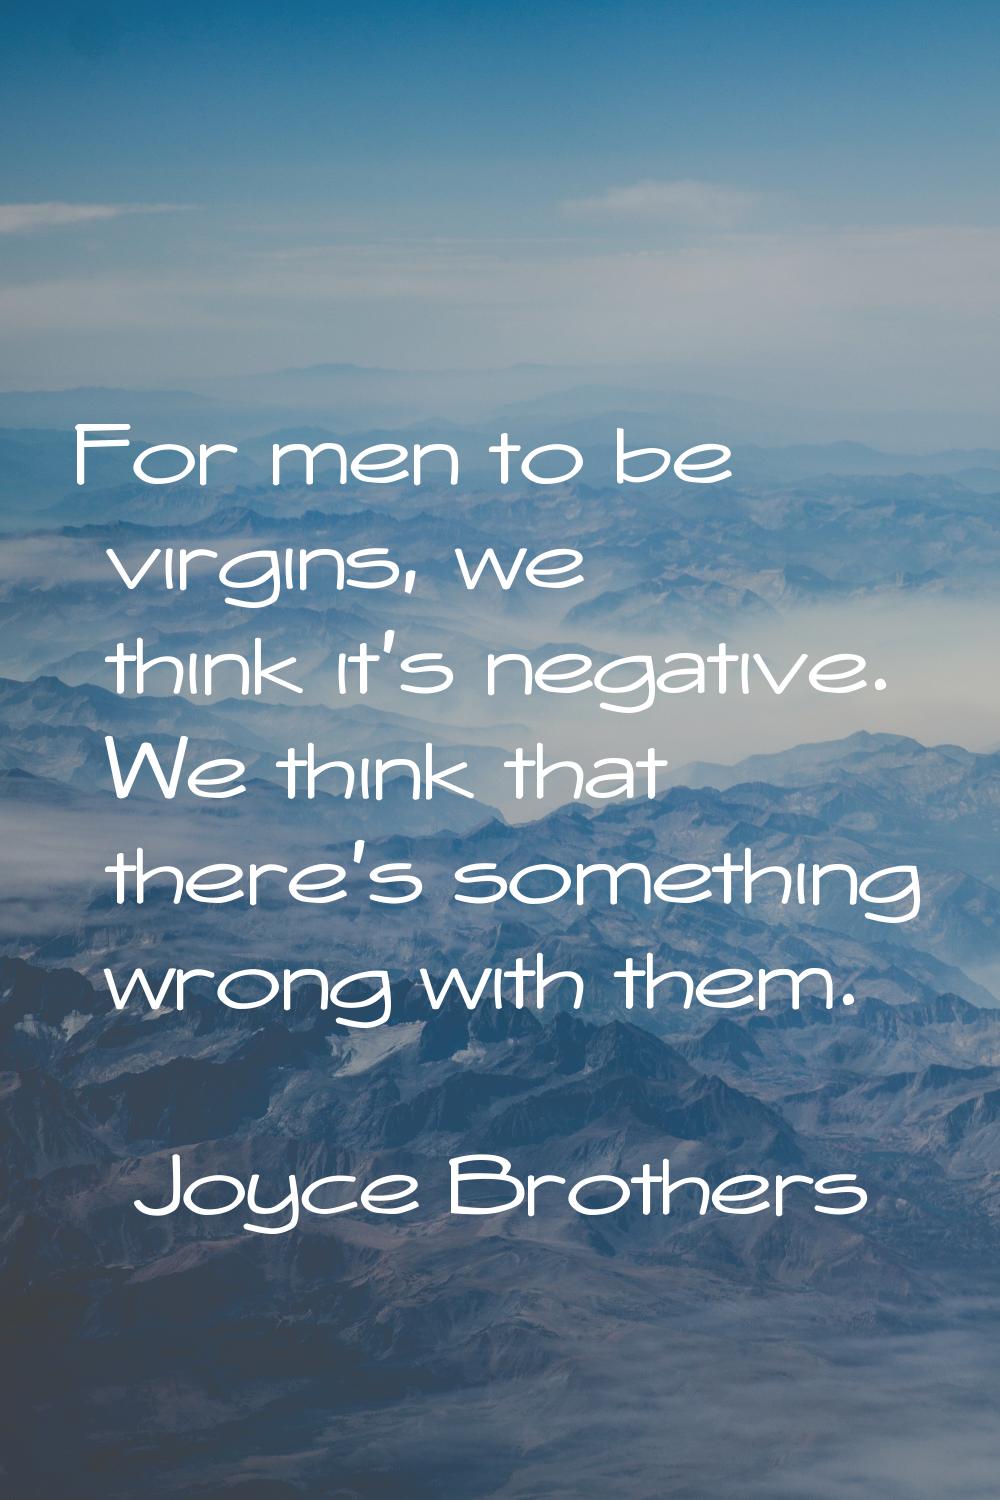 For men to be virgins, we think it's negative. We think that there's something wrong with them.